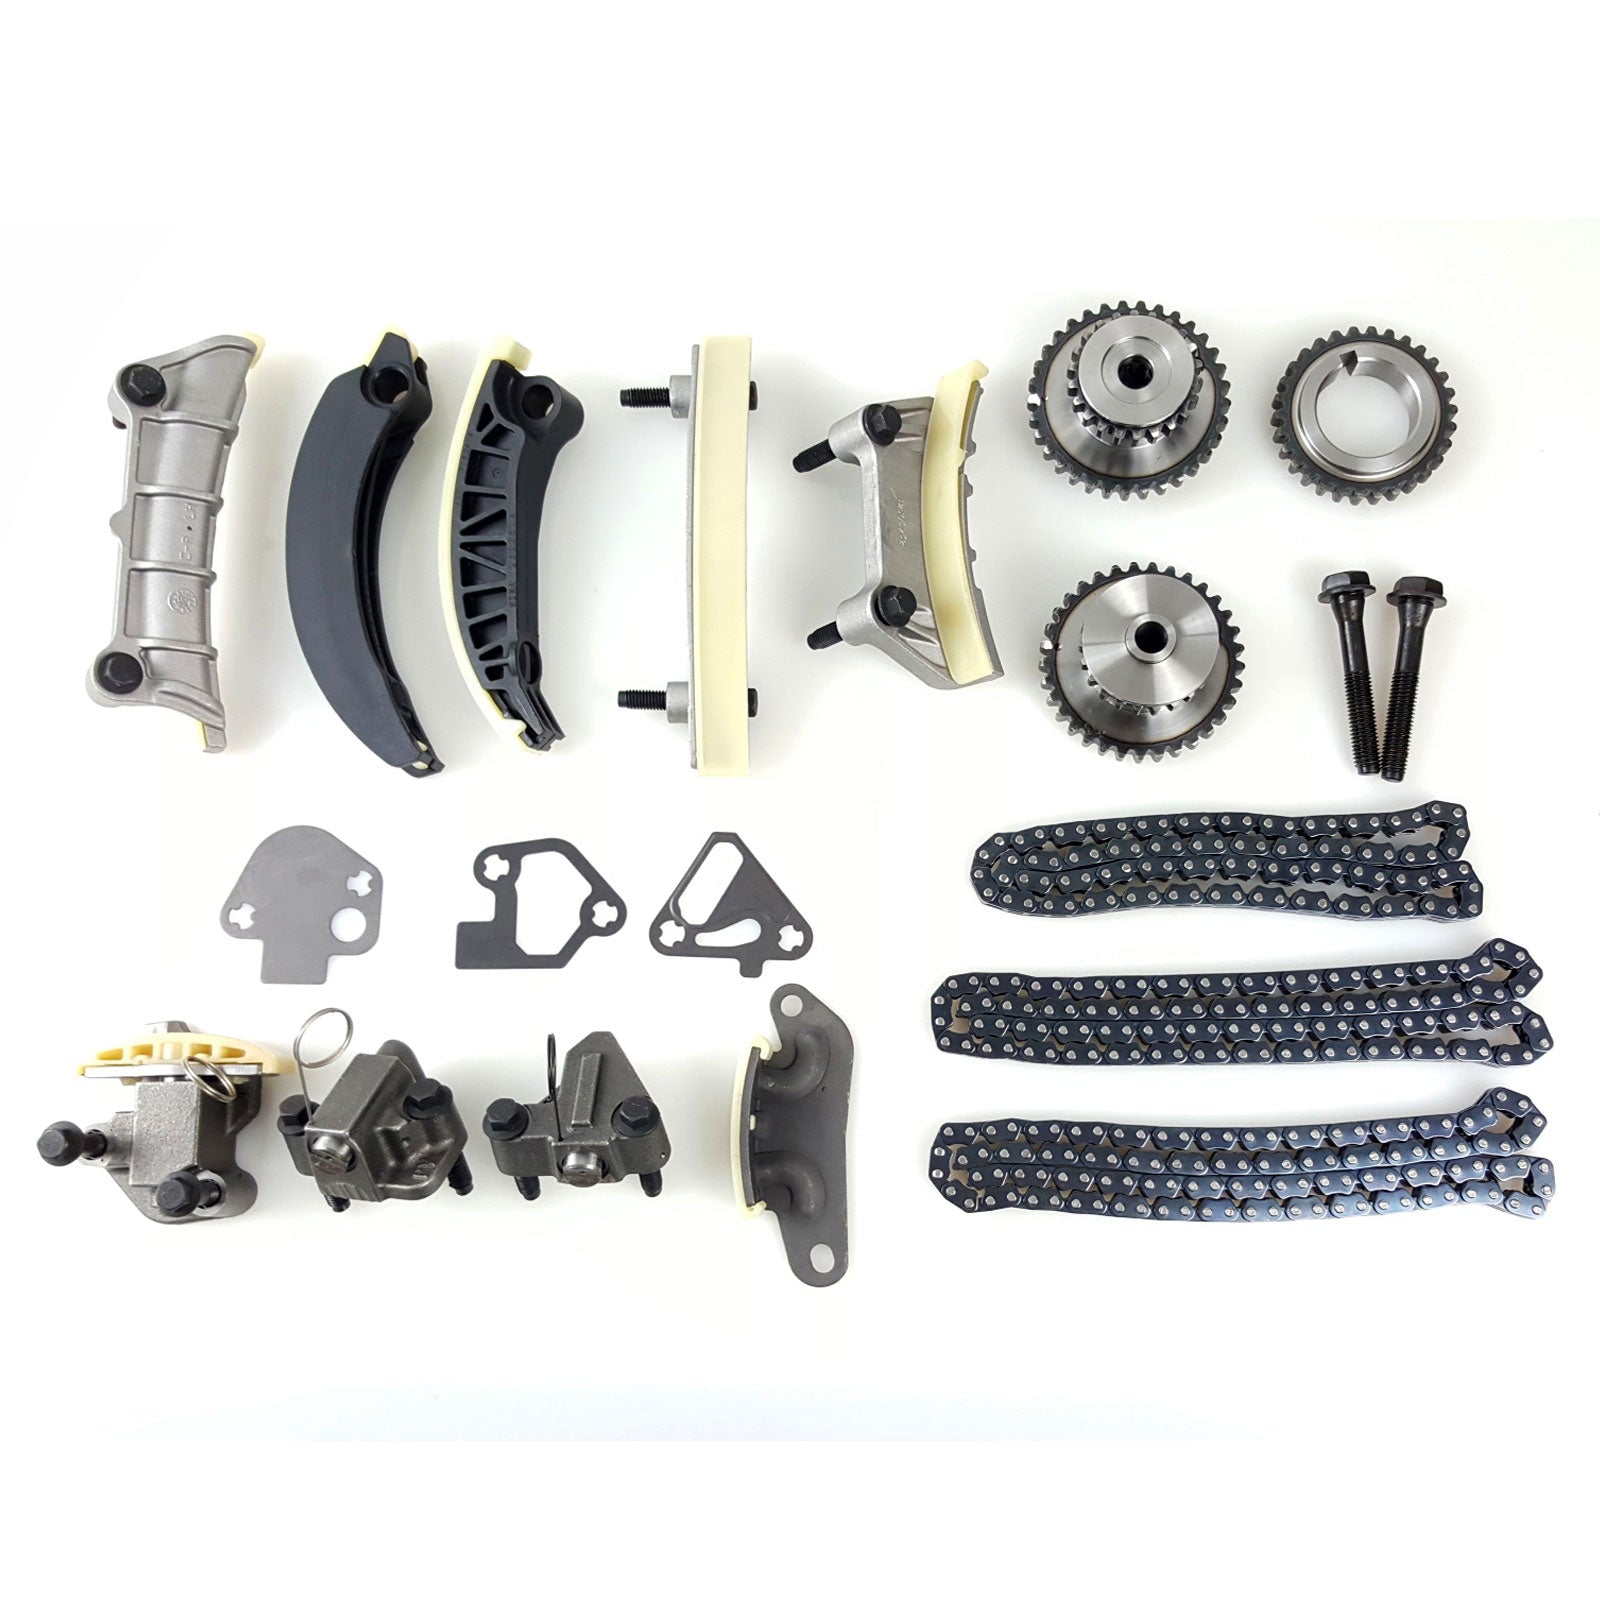 Holden Captiva CG 2006-2018 Timing Chain Kit and Gears 3.0L & 3.2L